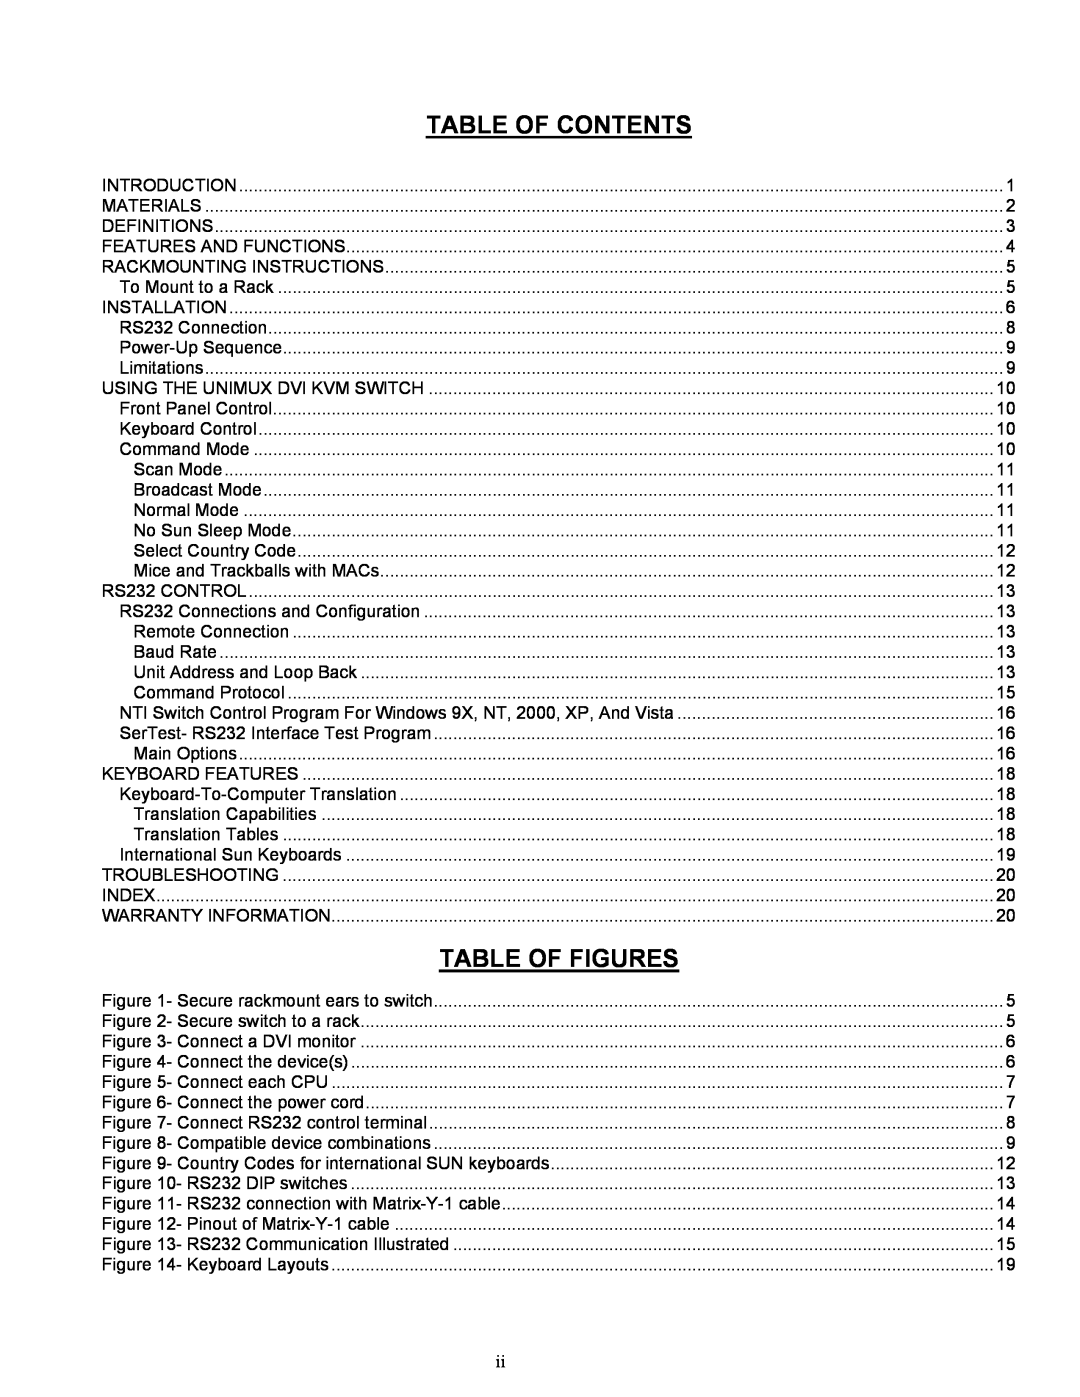 Network Technologies UNIMUX-DVI-xHD operation manual Table Of Contents, Table Of Figures 